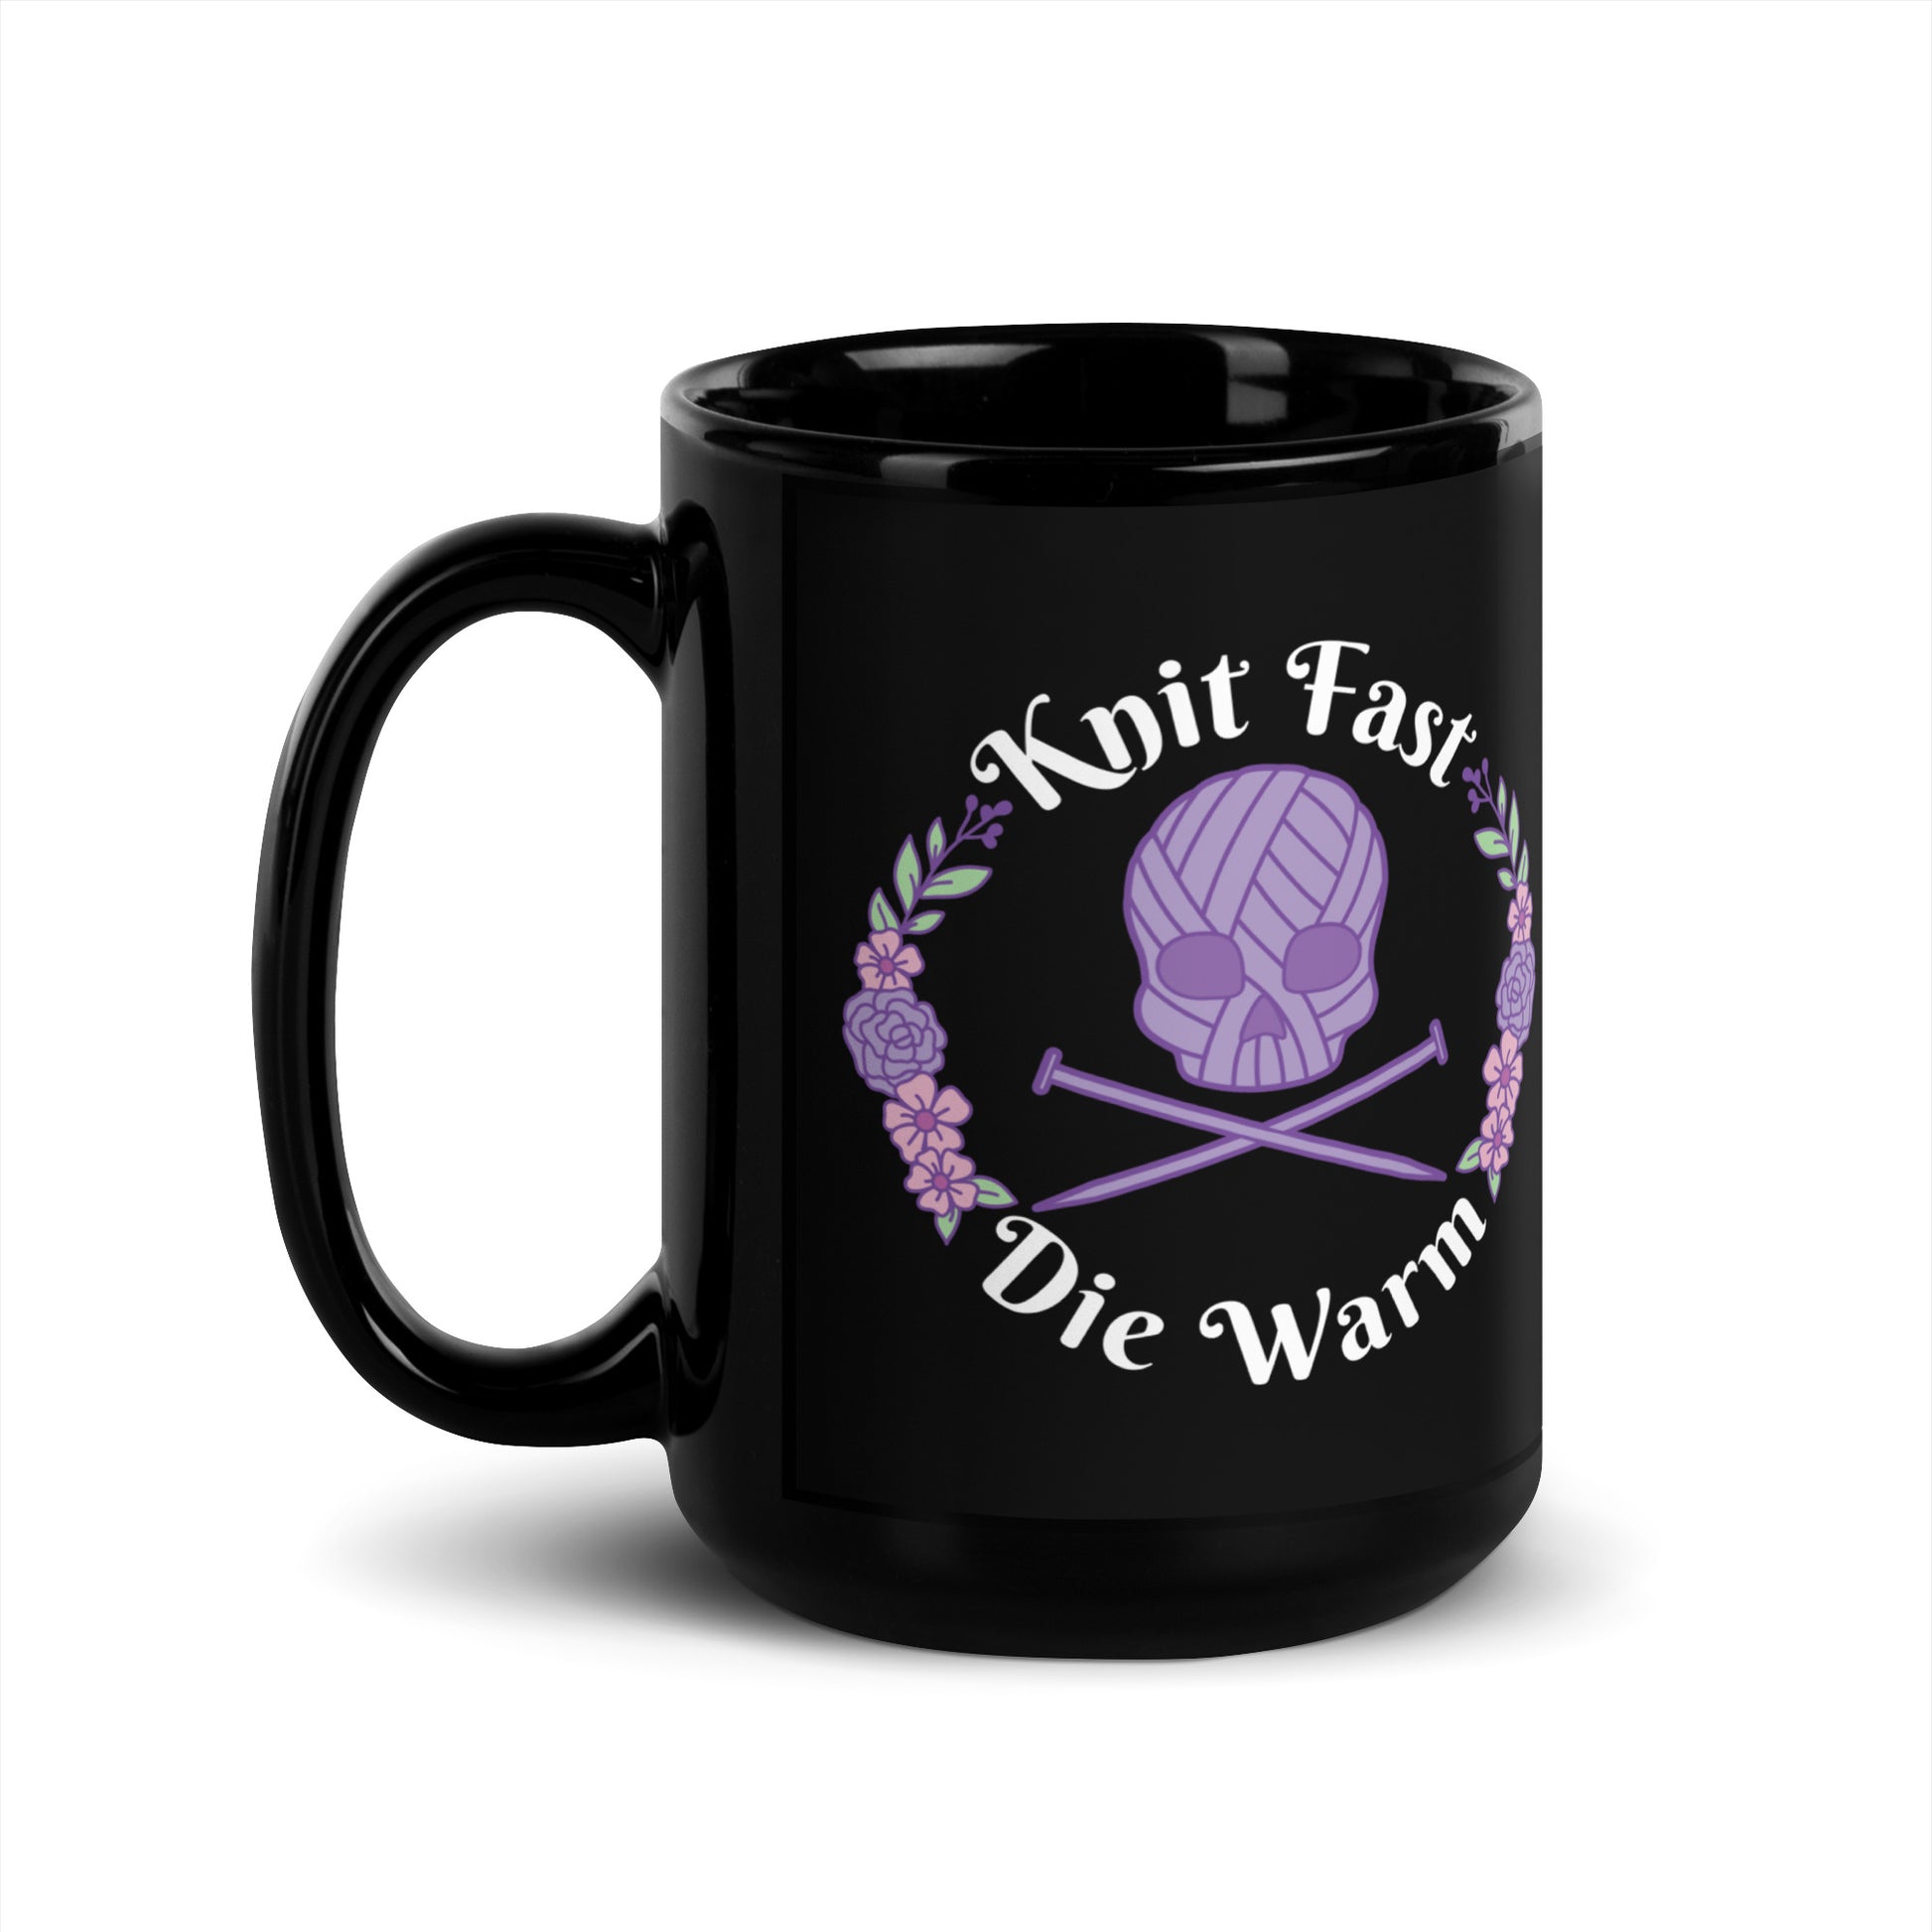 A black 15 ounce mug featuring an image of a purple skull and crossbones made of yarn and knitting needles. A floral wreath surrounds the skull, along with words that read "Knit Fast, Die Warm"